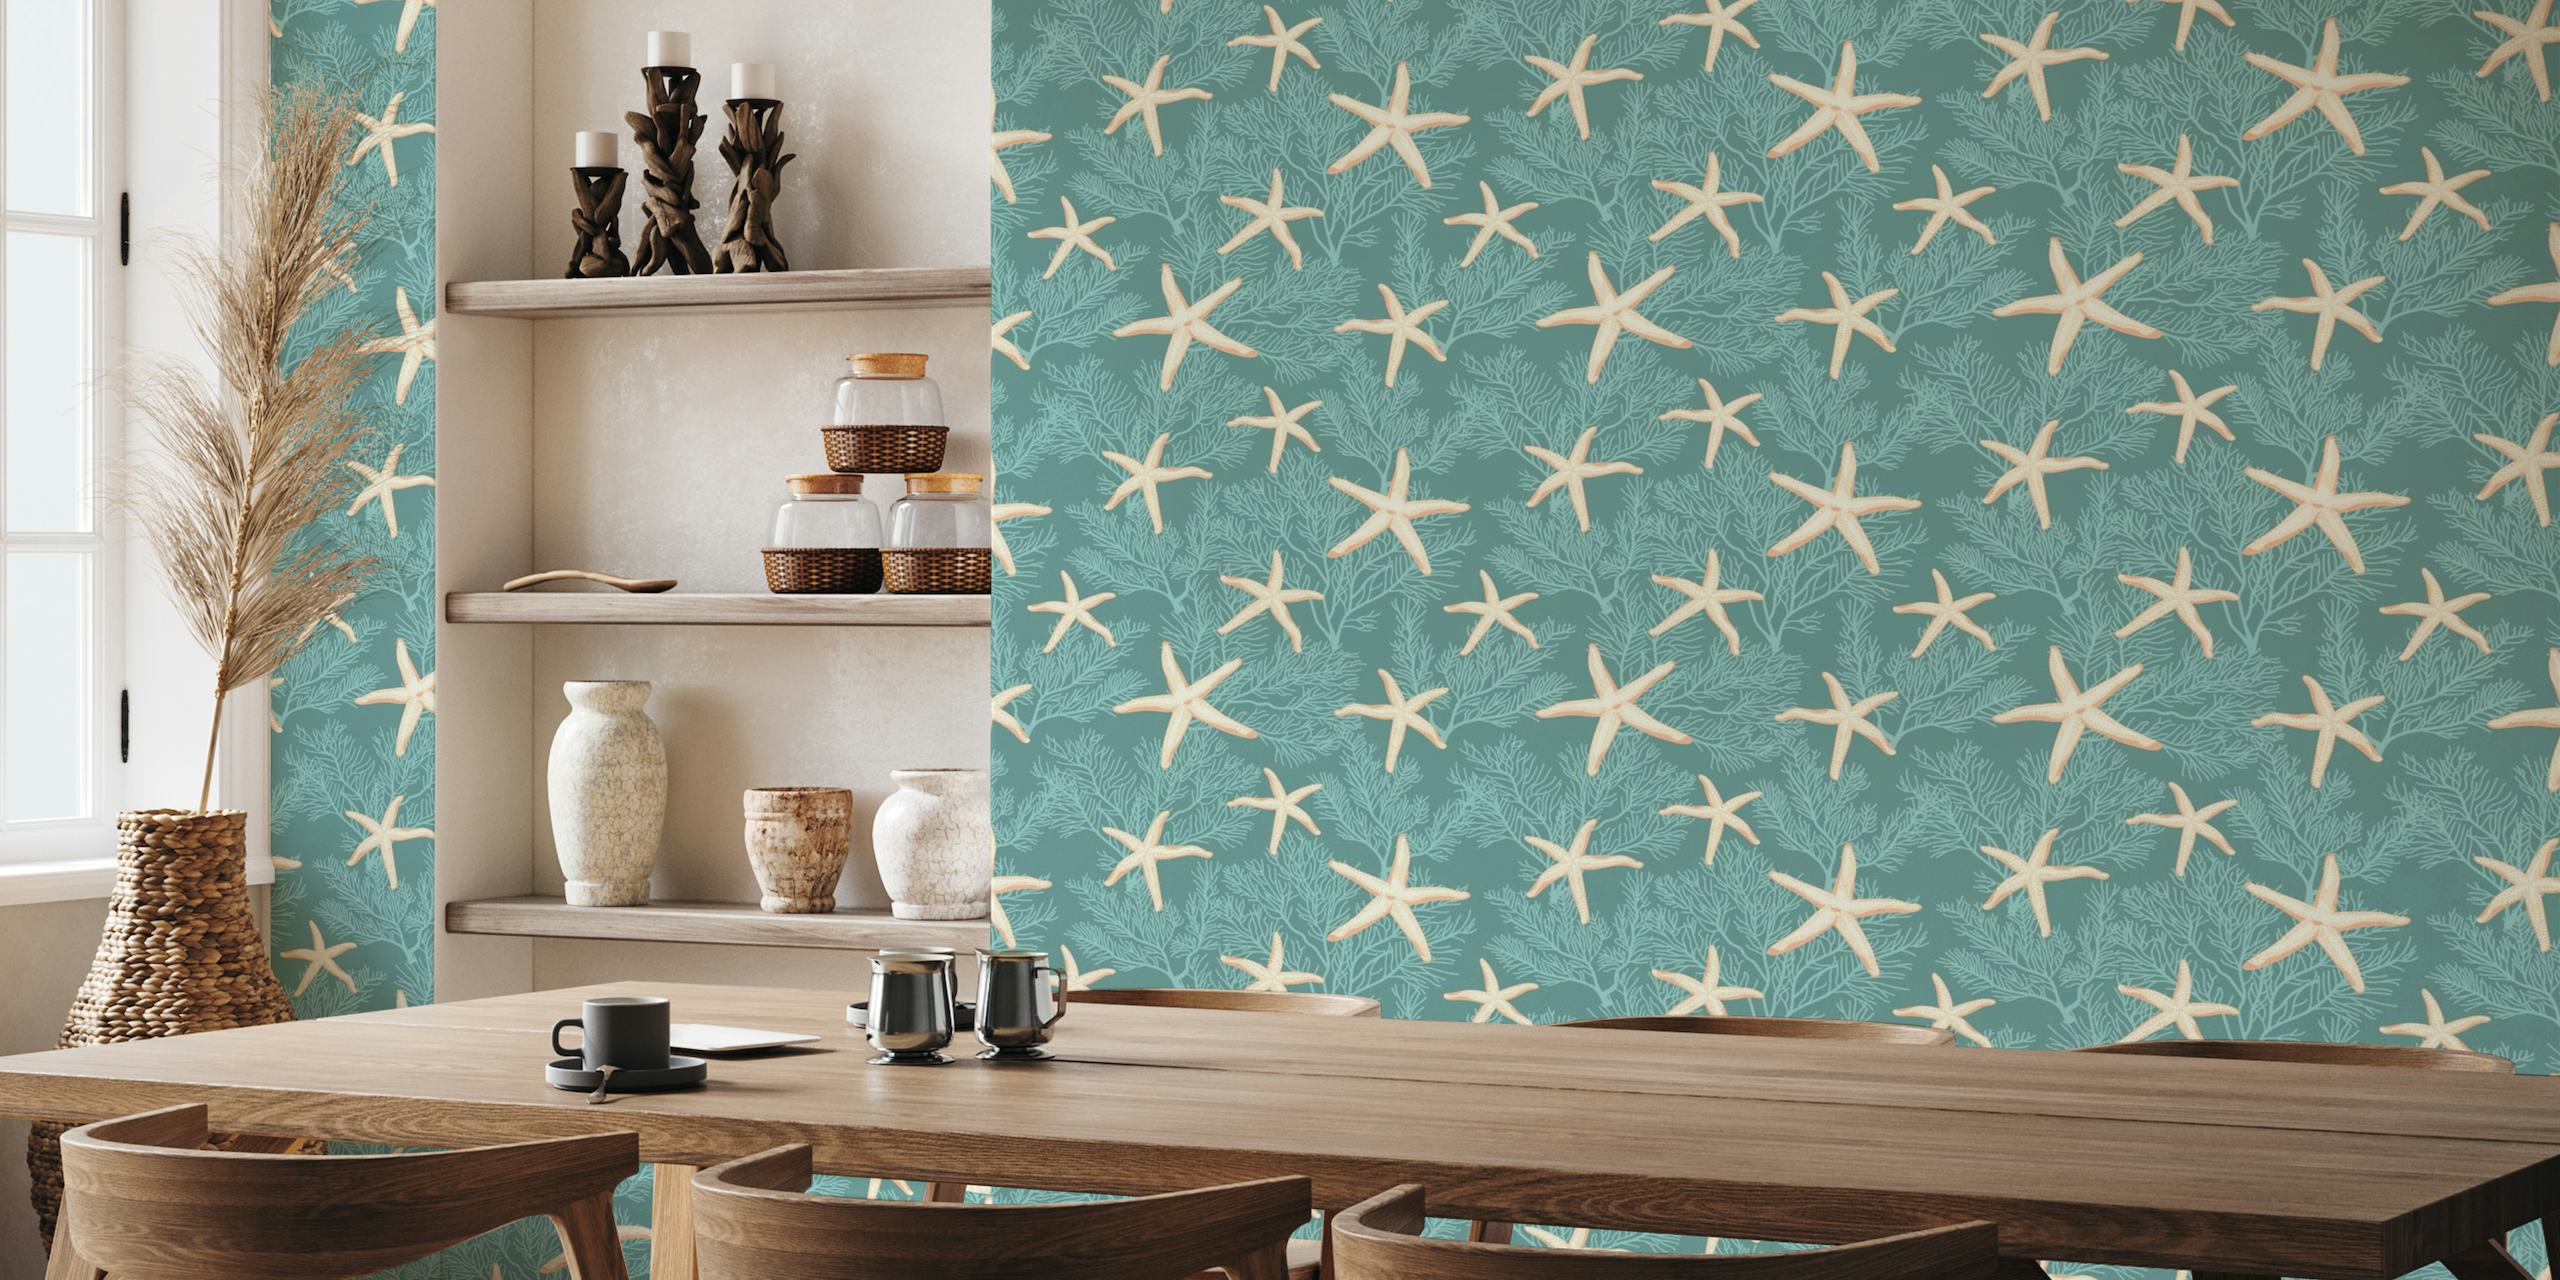 Light starfishes pattern on opal green background wall mural